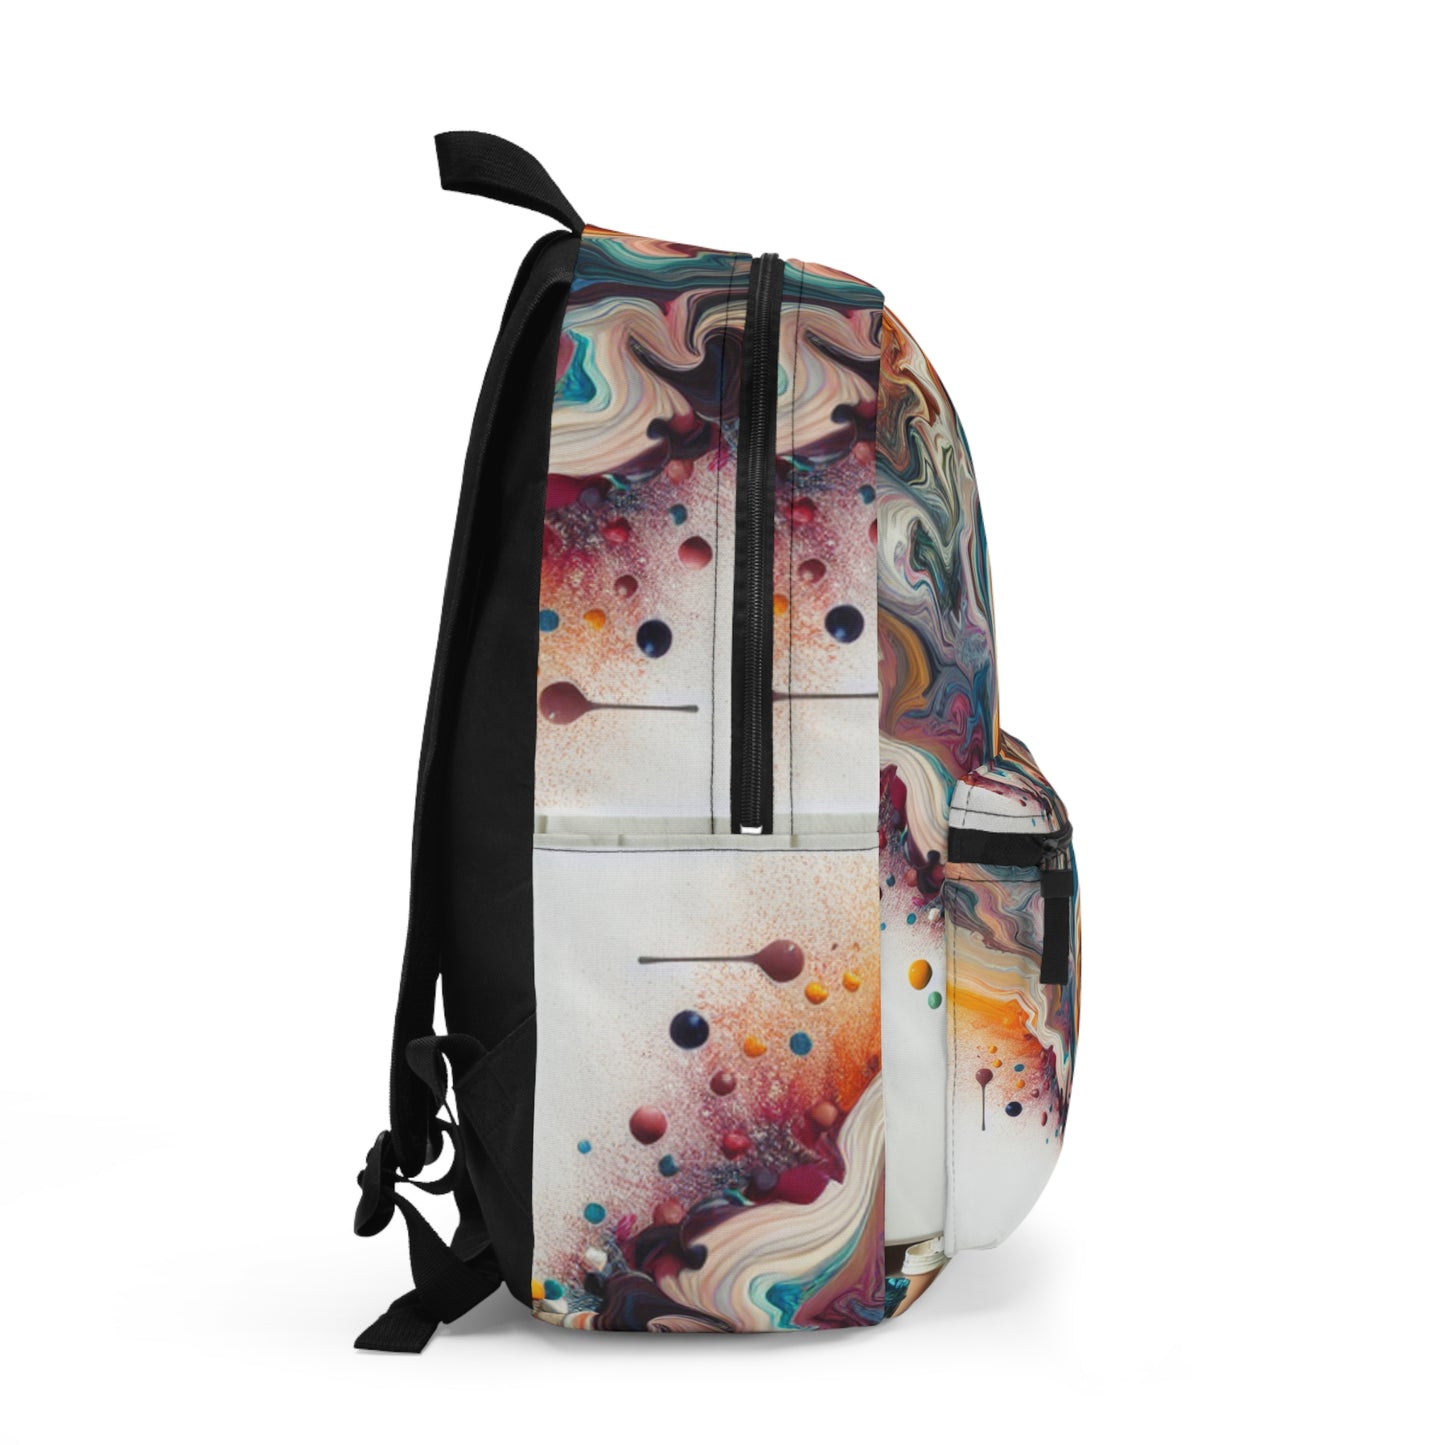 "A Paint Poured Paradise: Acrylic Pouring Art" - The Alien Backpack Acrylic Pouring Style